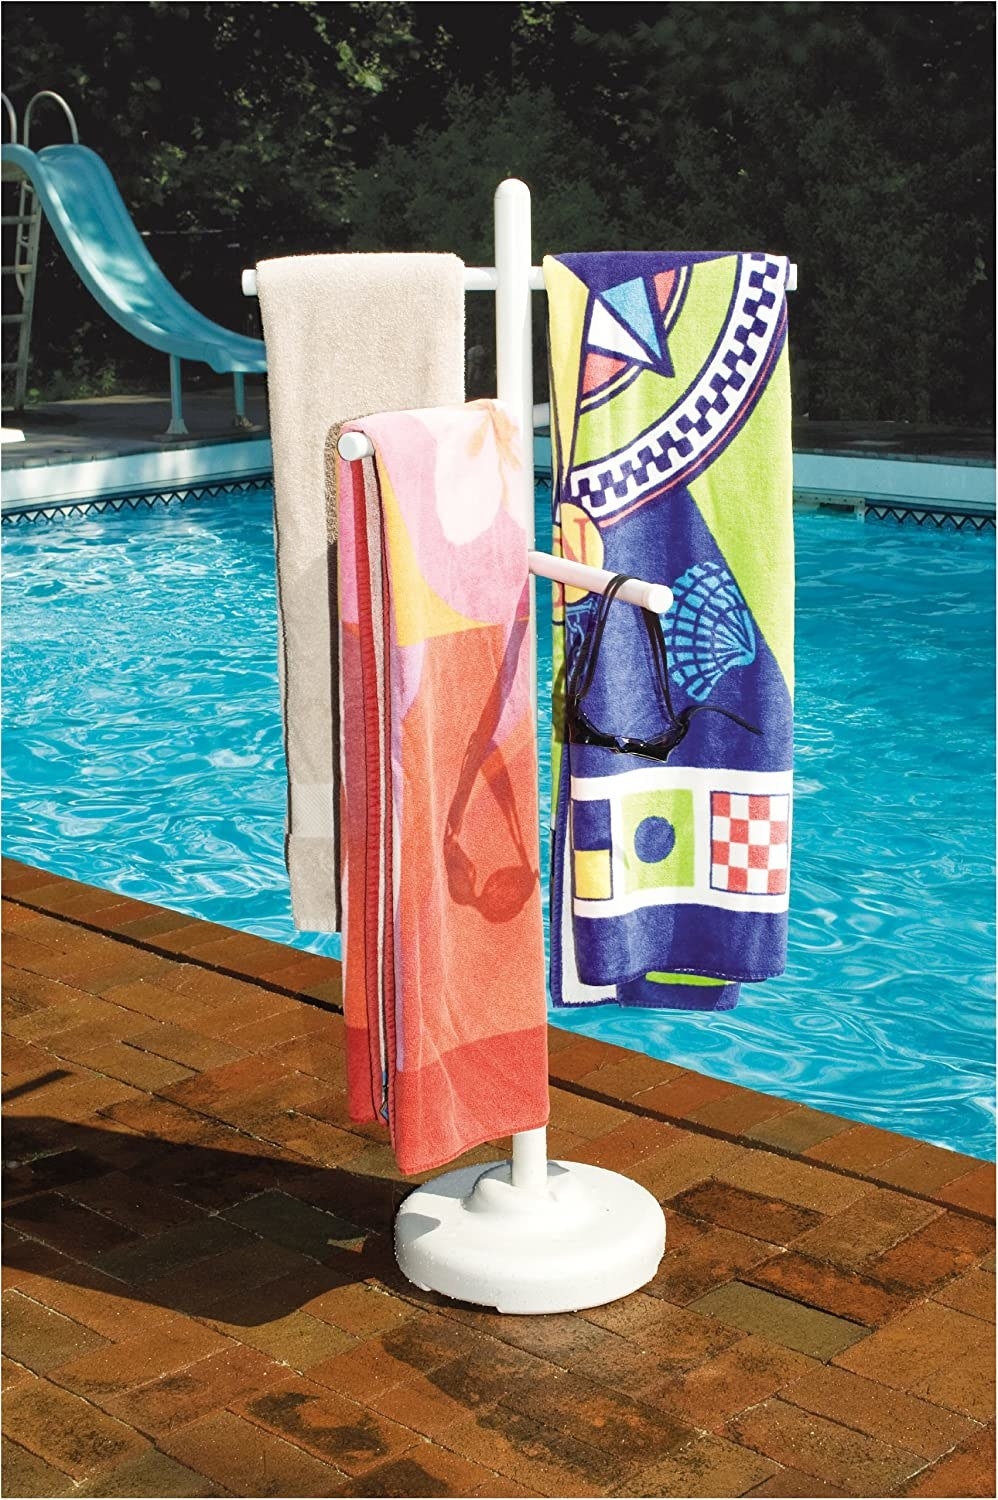 The rack holding three towels by a pool